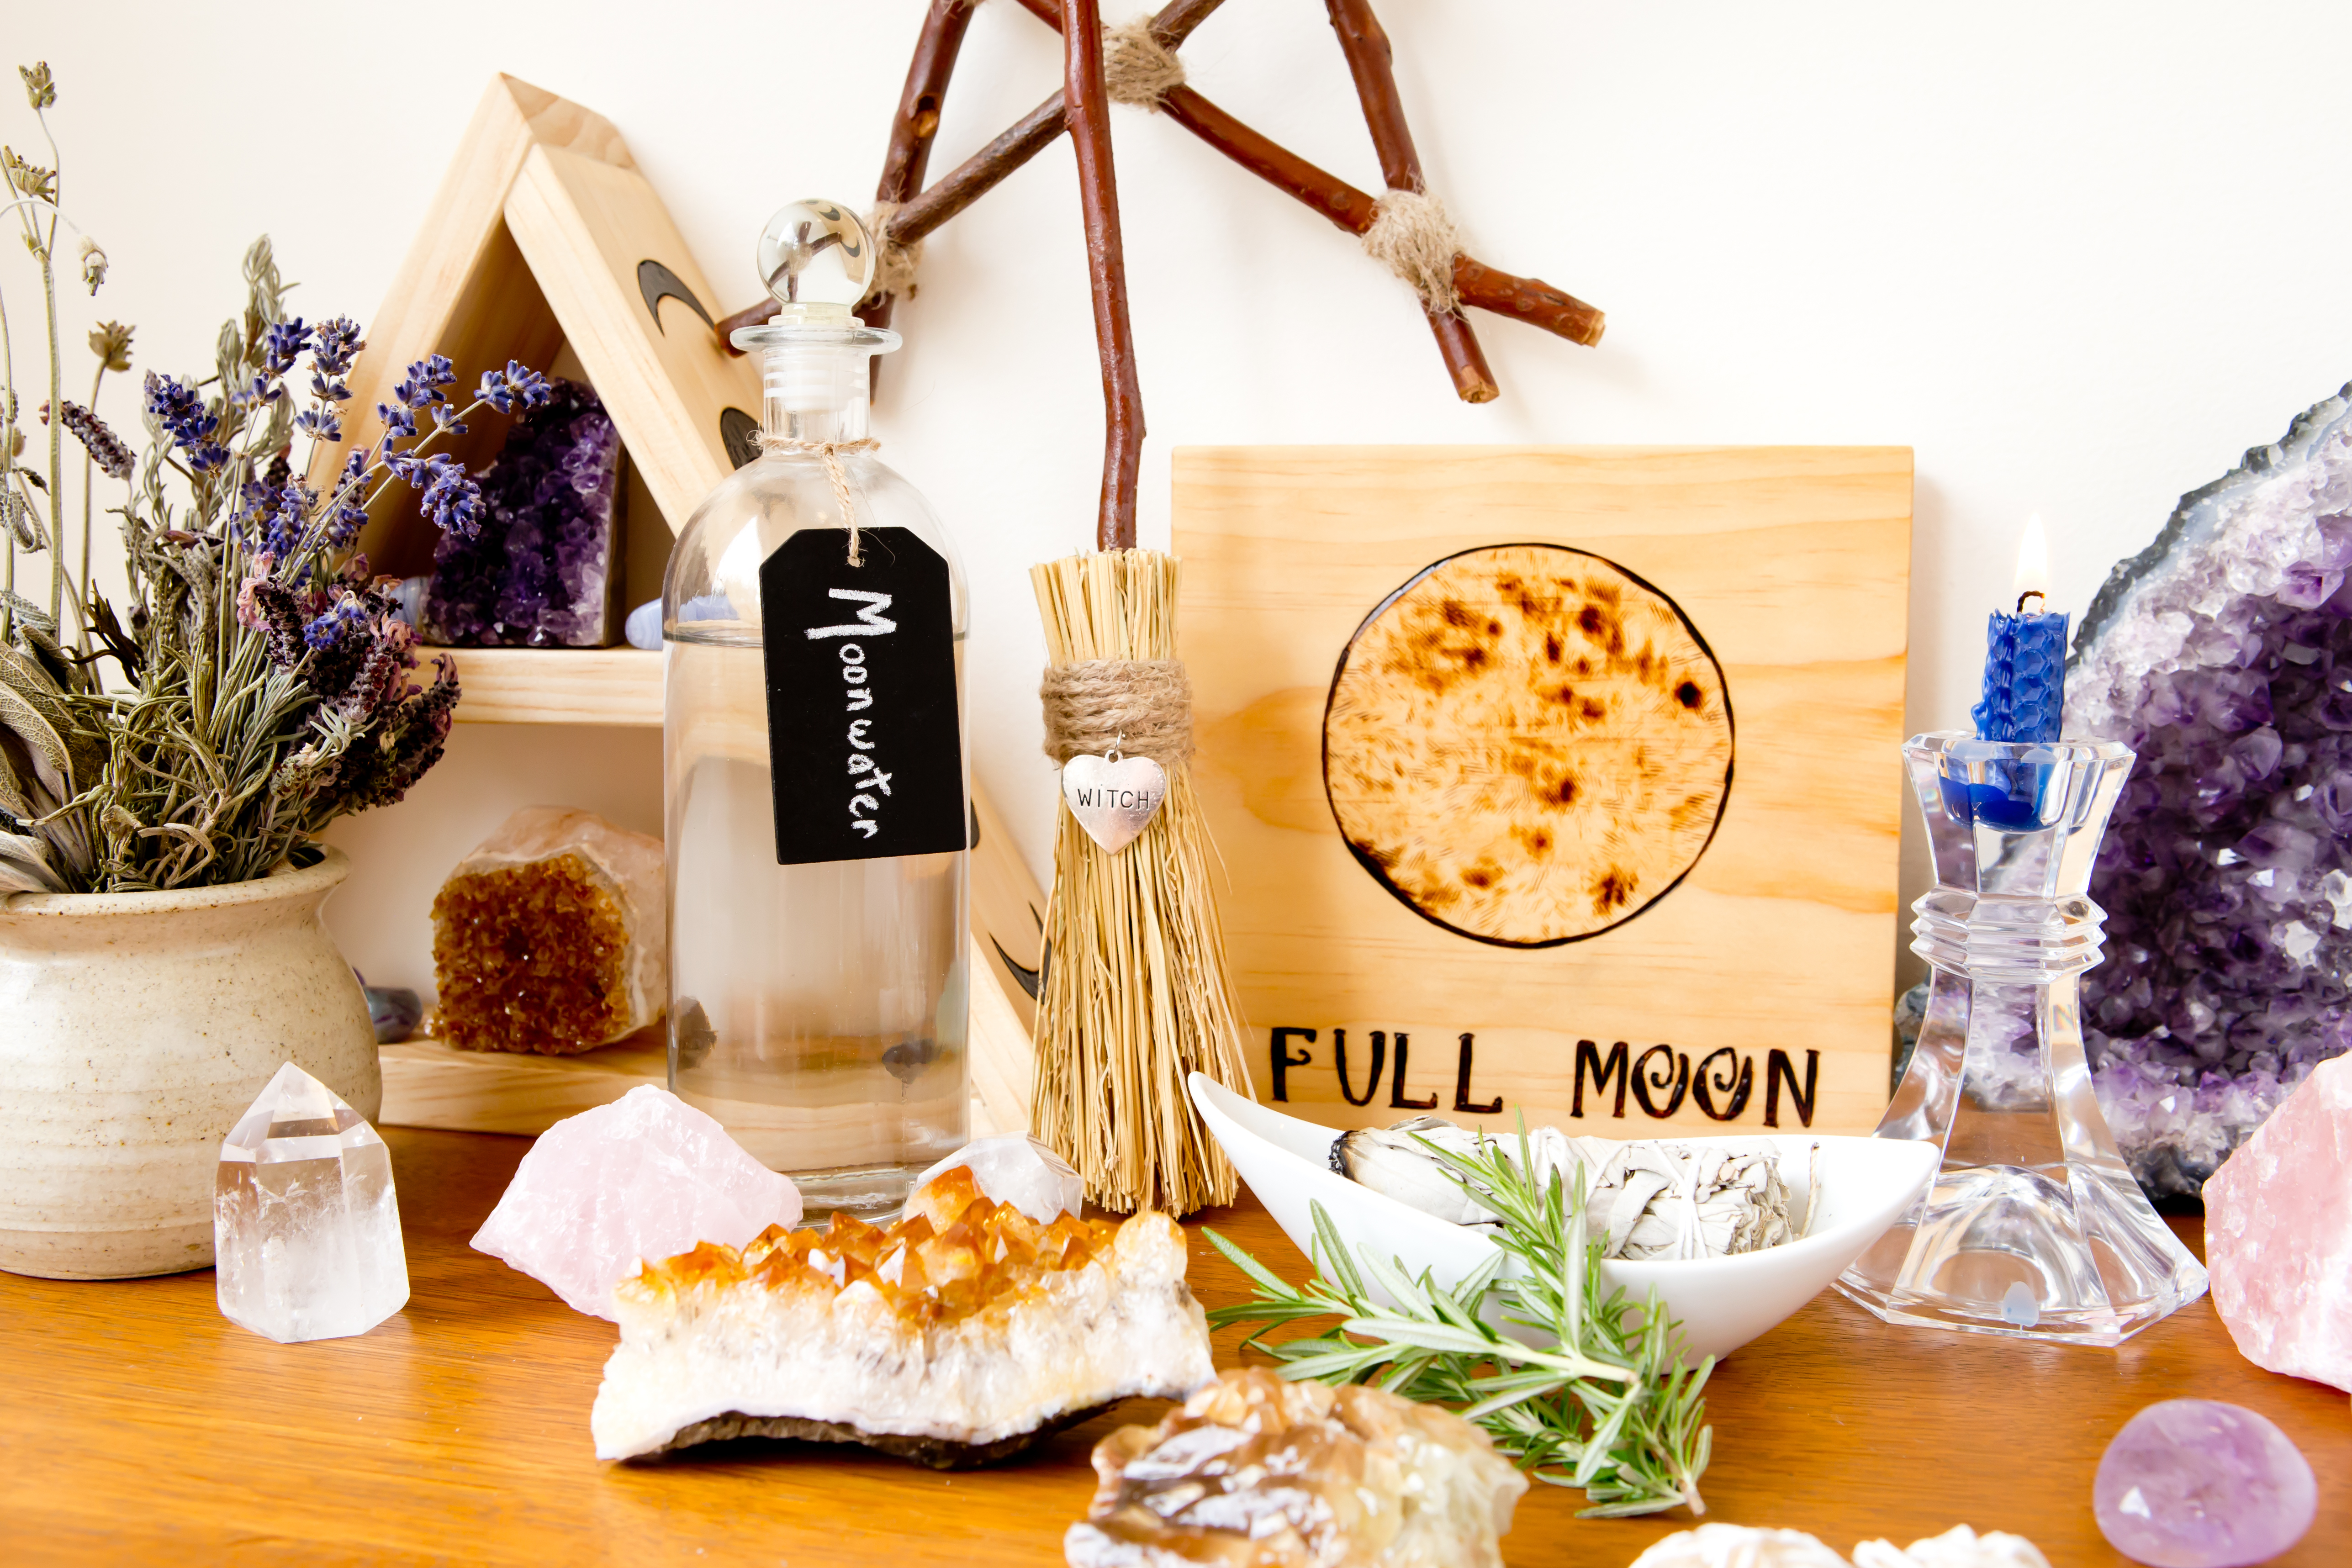 A number of items for a full moon ritual including crystals, moonwater and lavendar